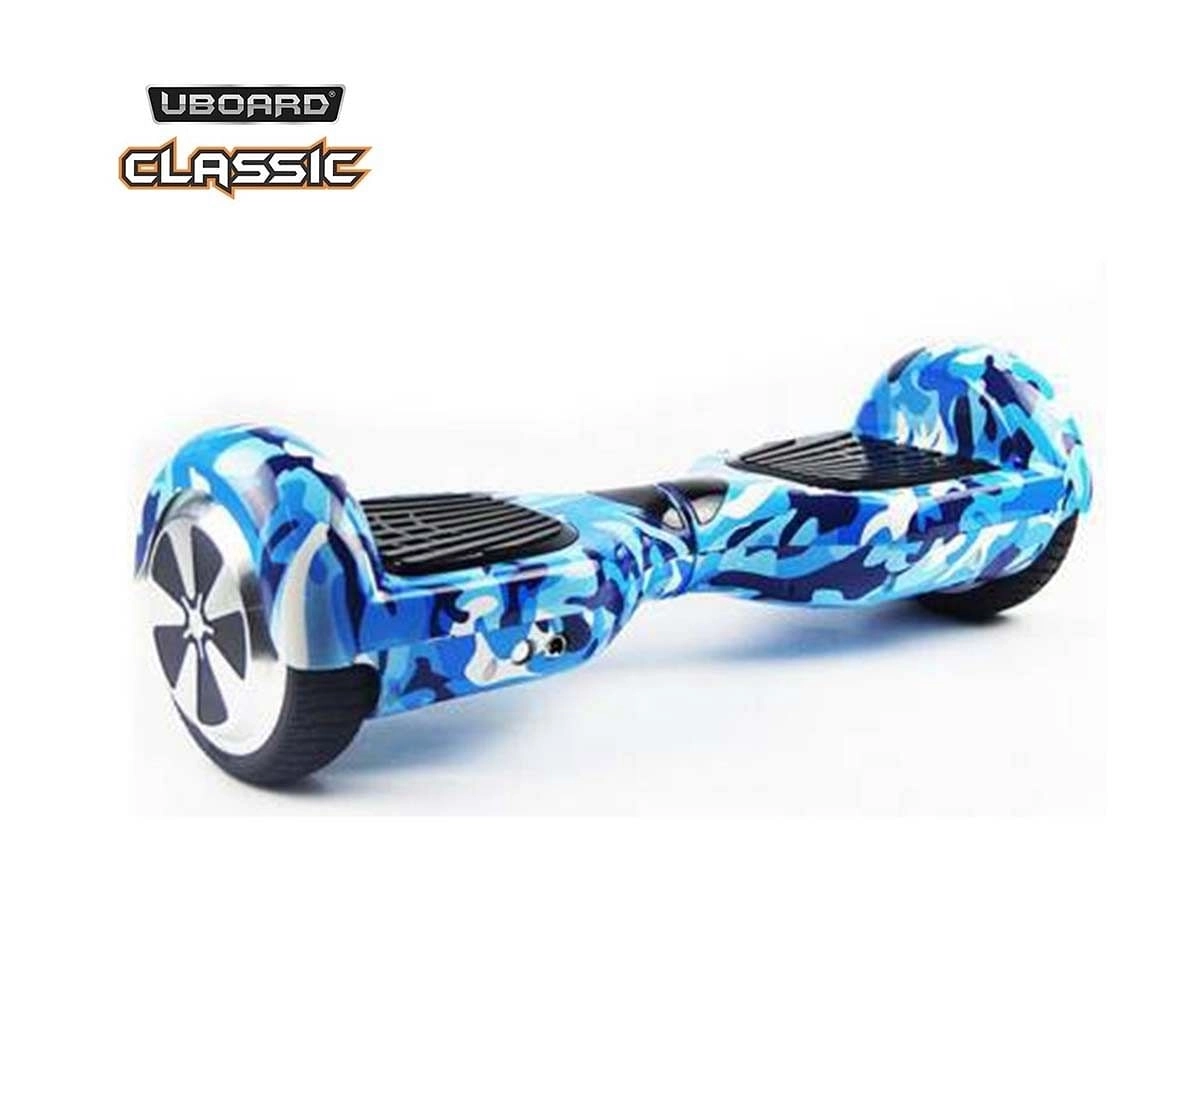 Uboard Hoverboard Classic 6.5 Lite Ev Novelty Rideons for Kids age 14Y+ 